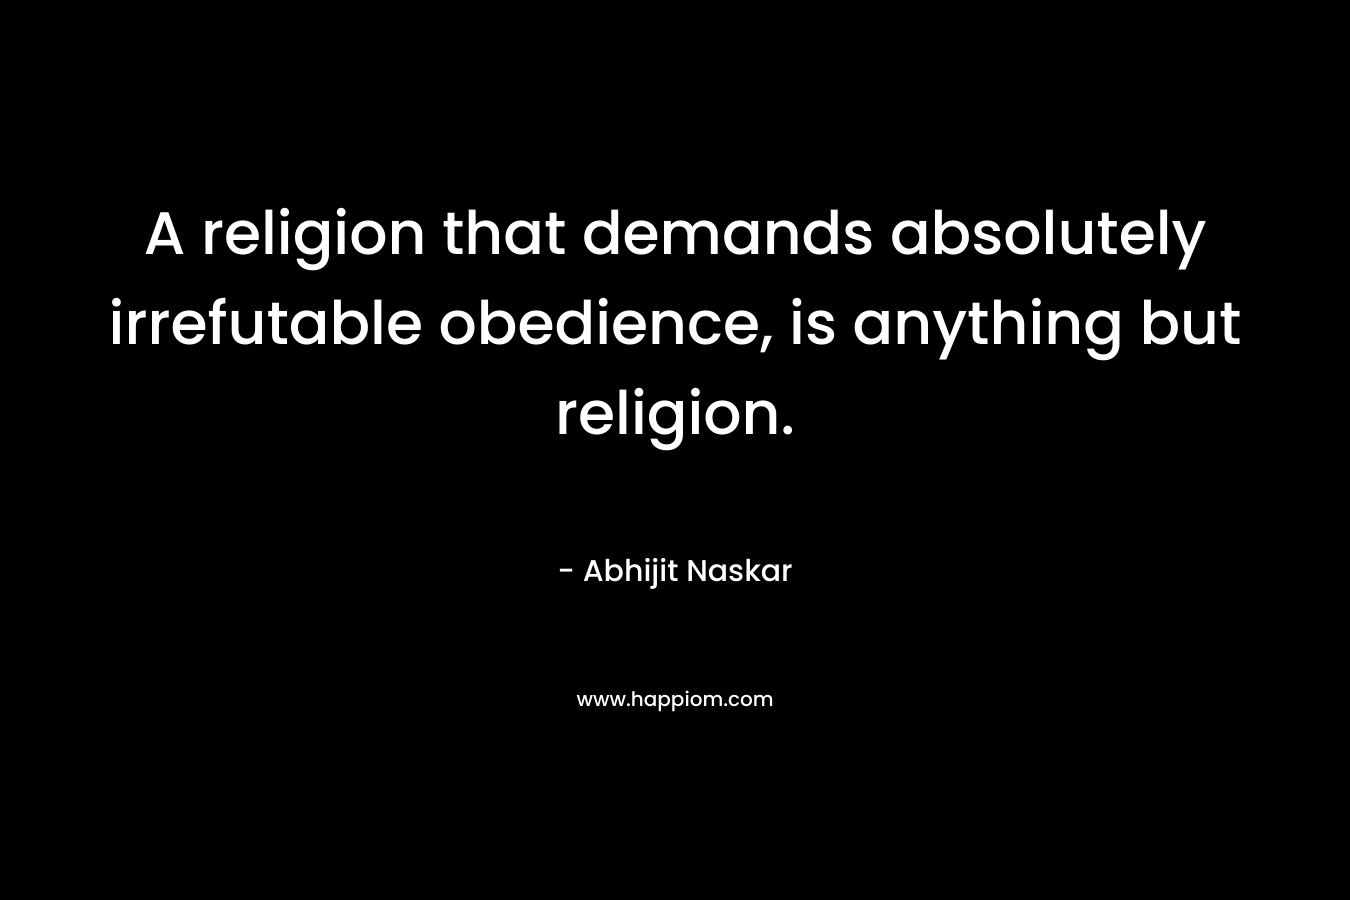 A religion that demands absolutely irrefutable obedience, is anything but religion. – Abhijit Naskar